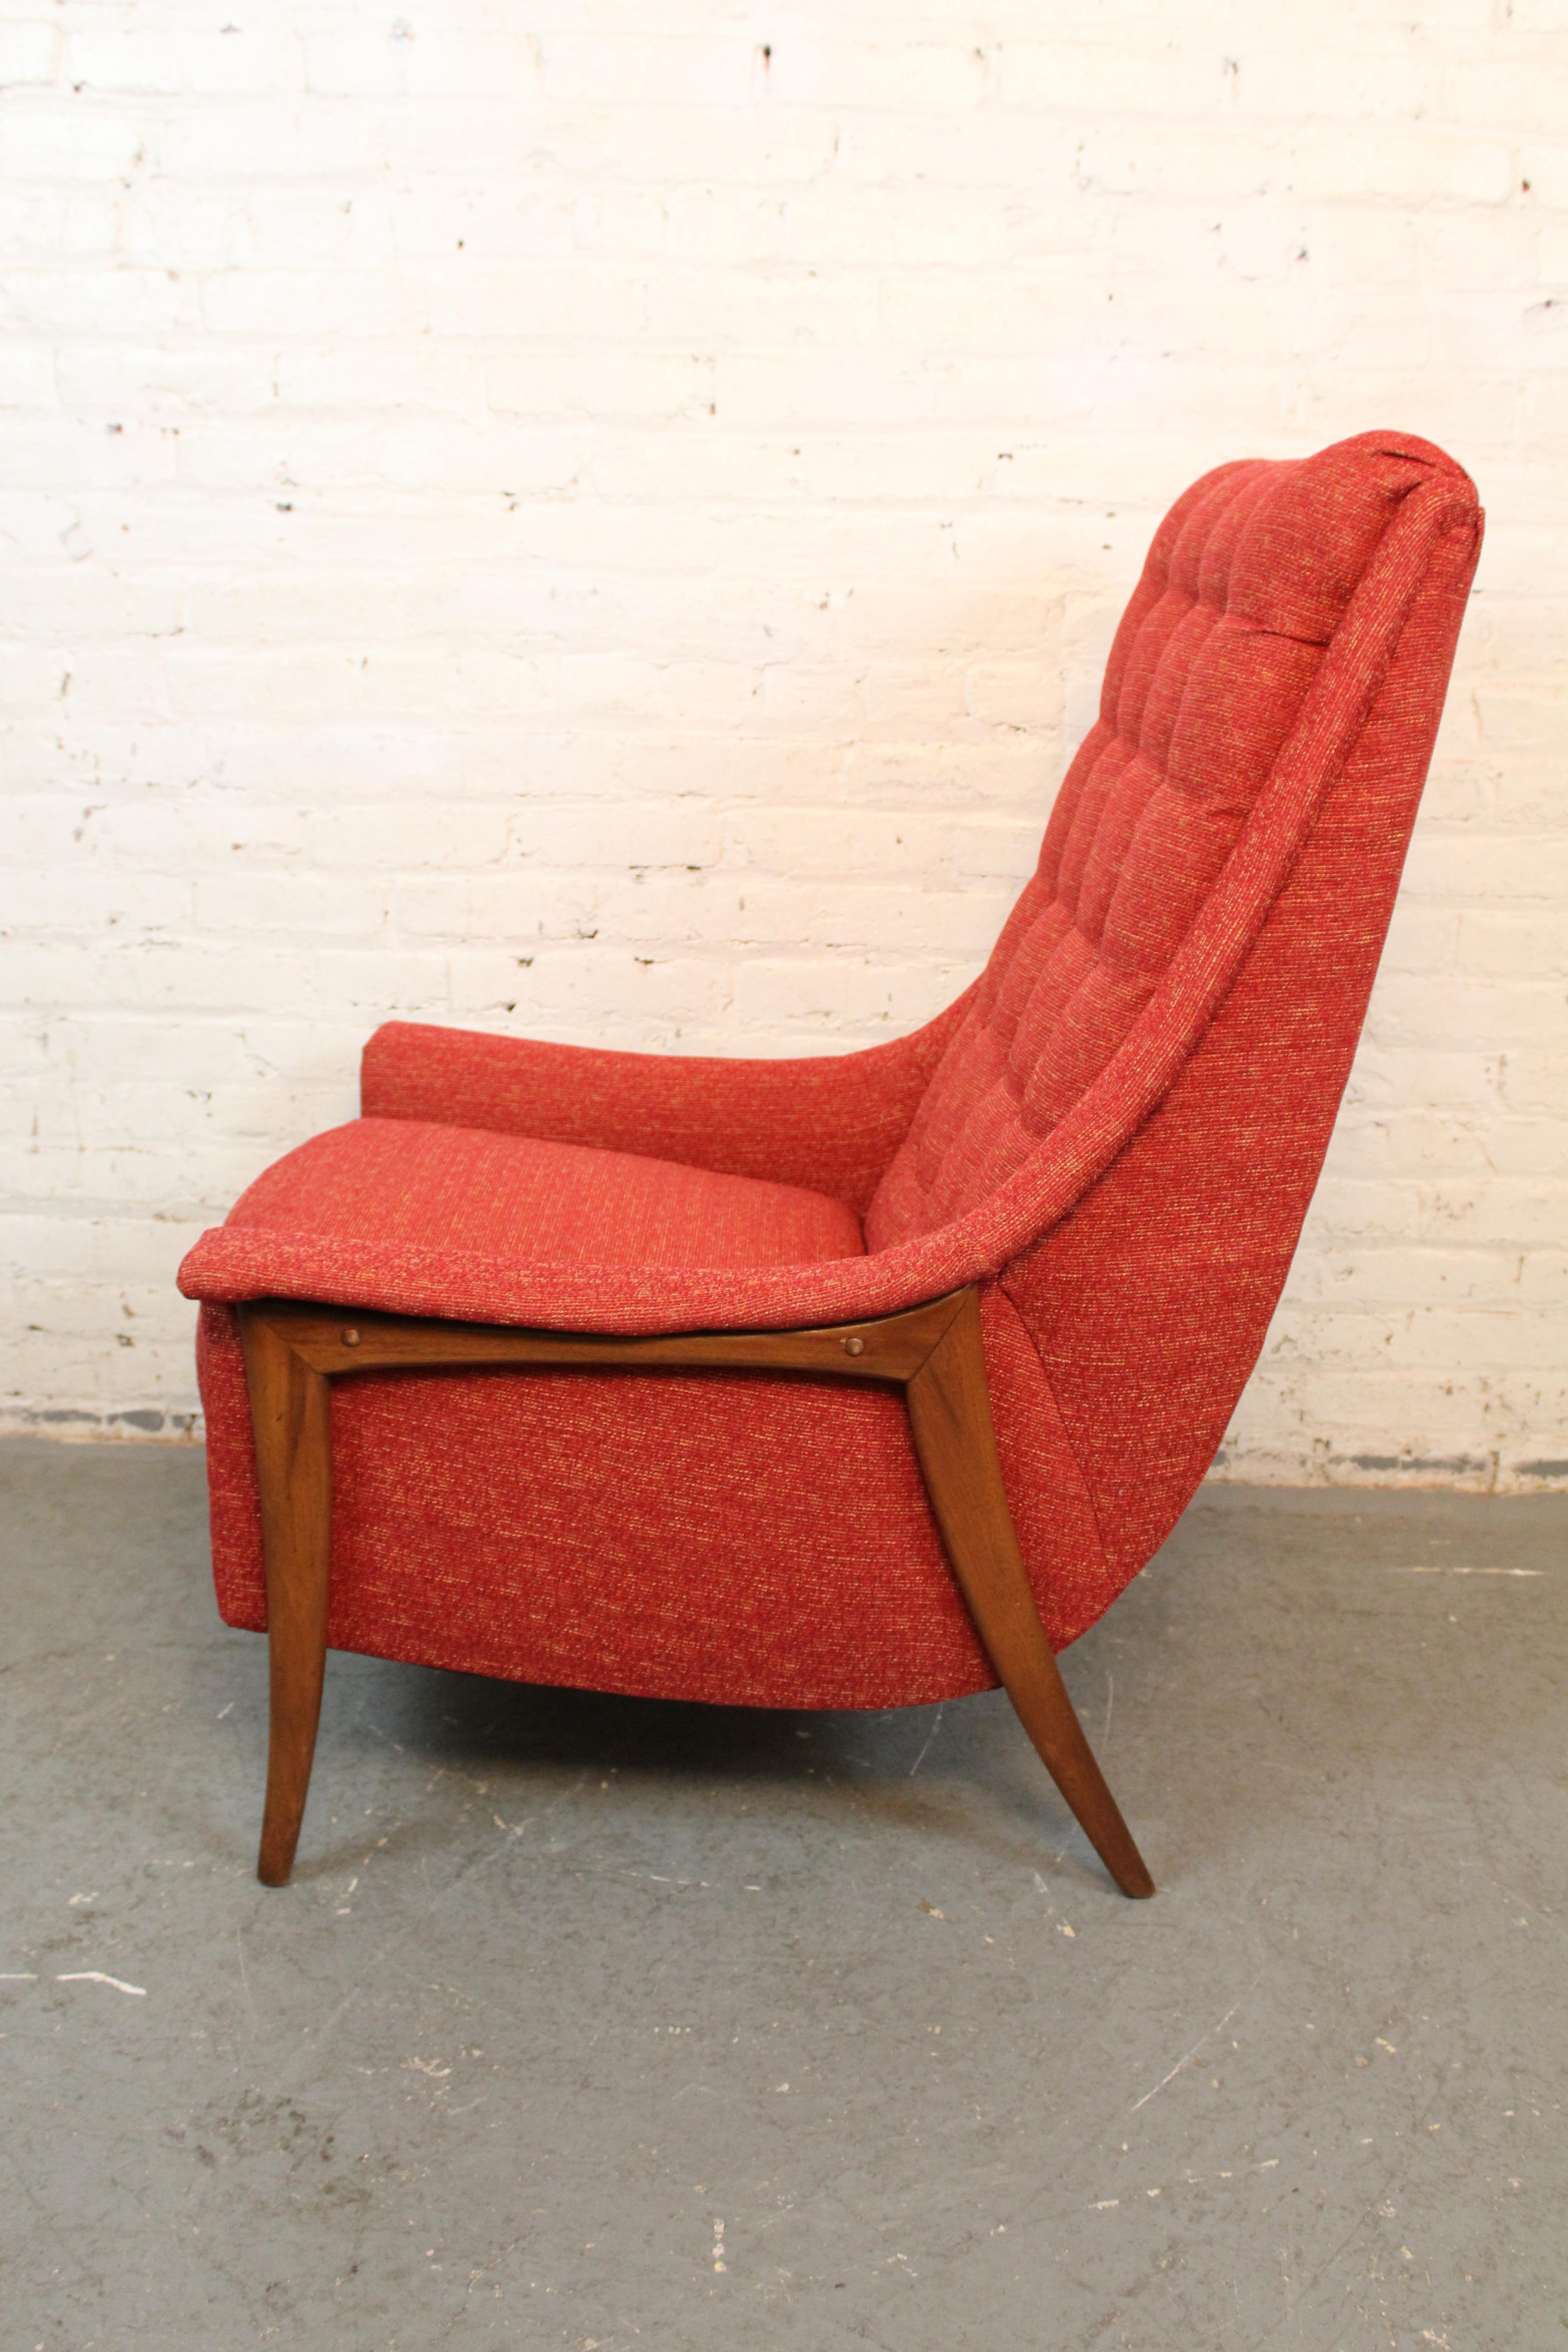 Embrace both the fashion and function of genuine mid-century modernism with this excellent tufted lounge chair by Kroehler Manufacturing Co. of Naperville, Illinois. Balancing robust American construction with elegant Scandinavian design influence,